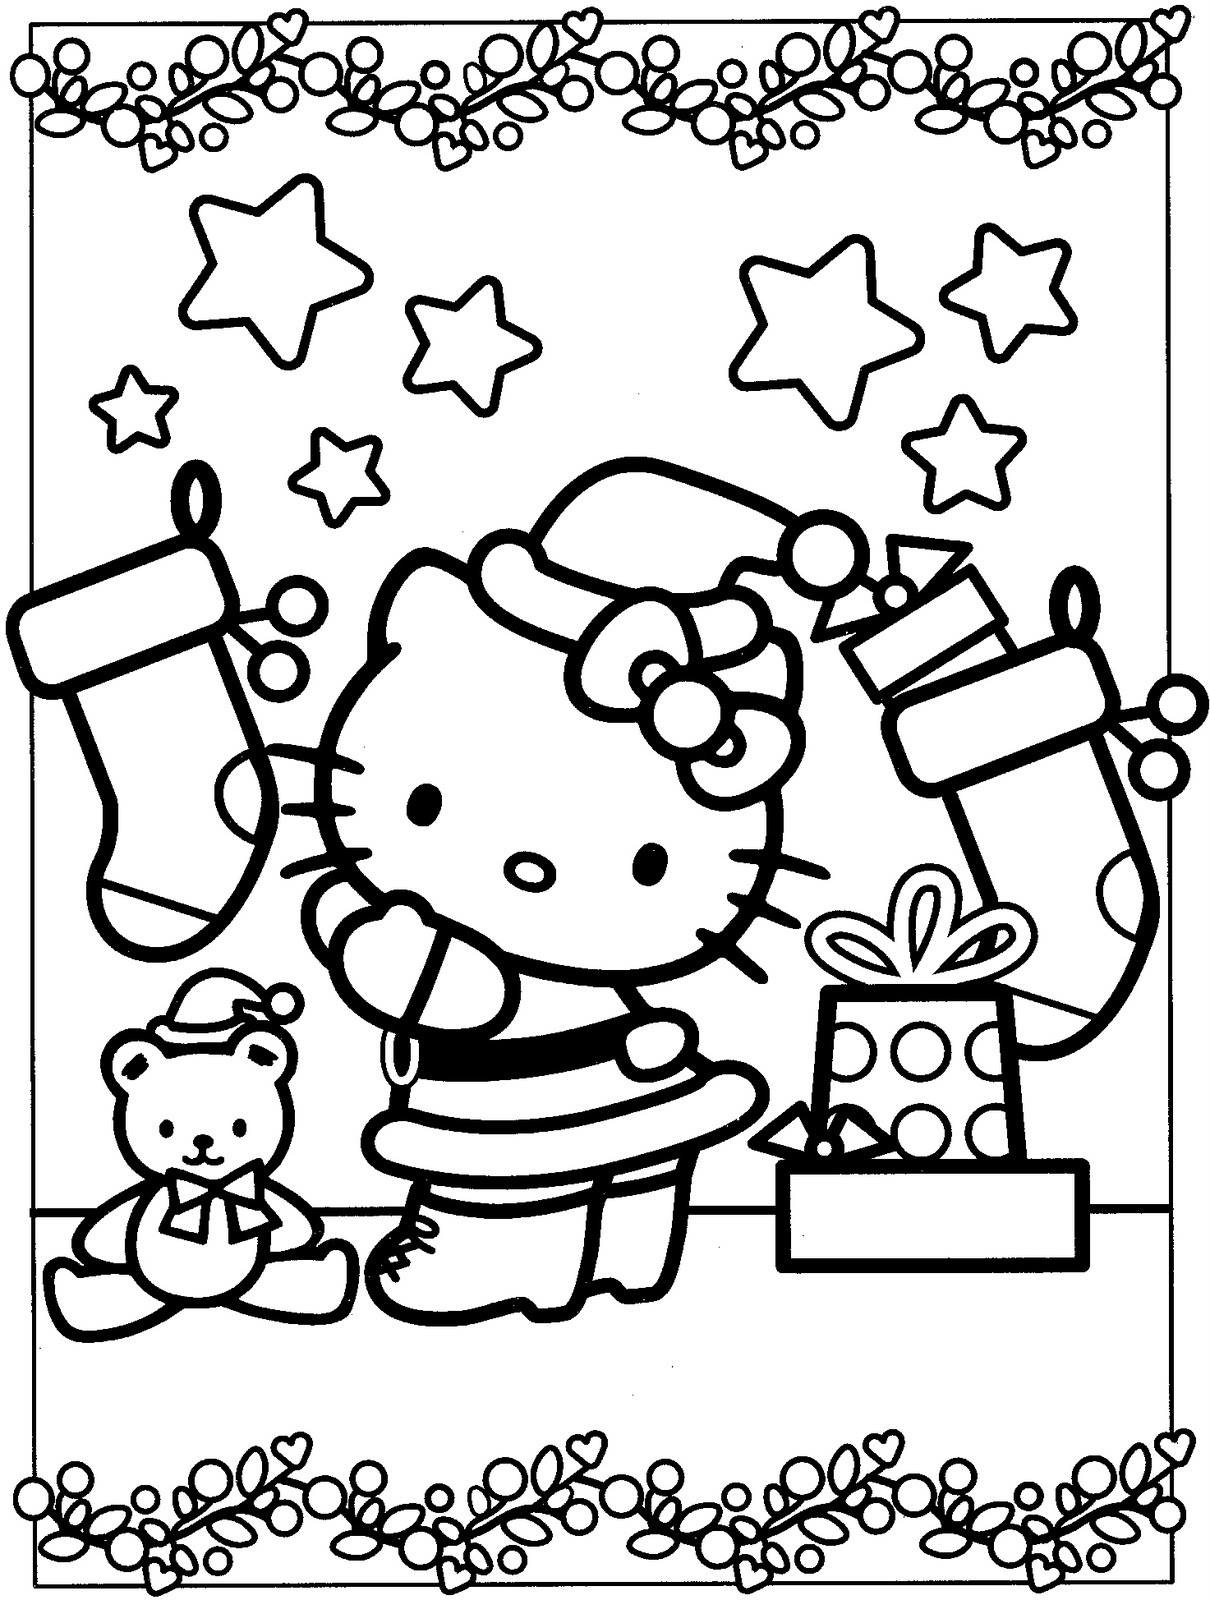 Mermaid Hello Kitty Coloring Pages at GetColorings.com ...